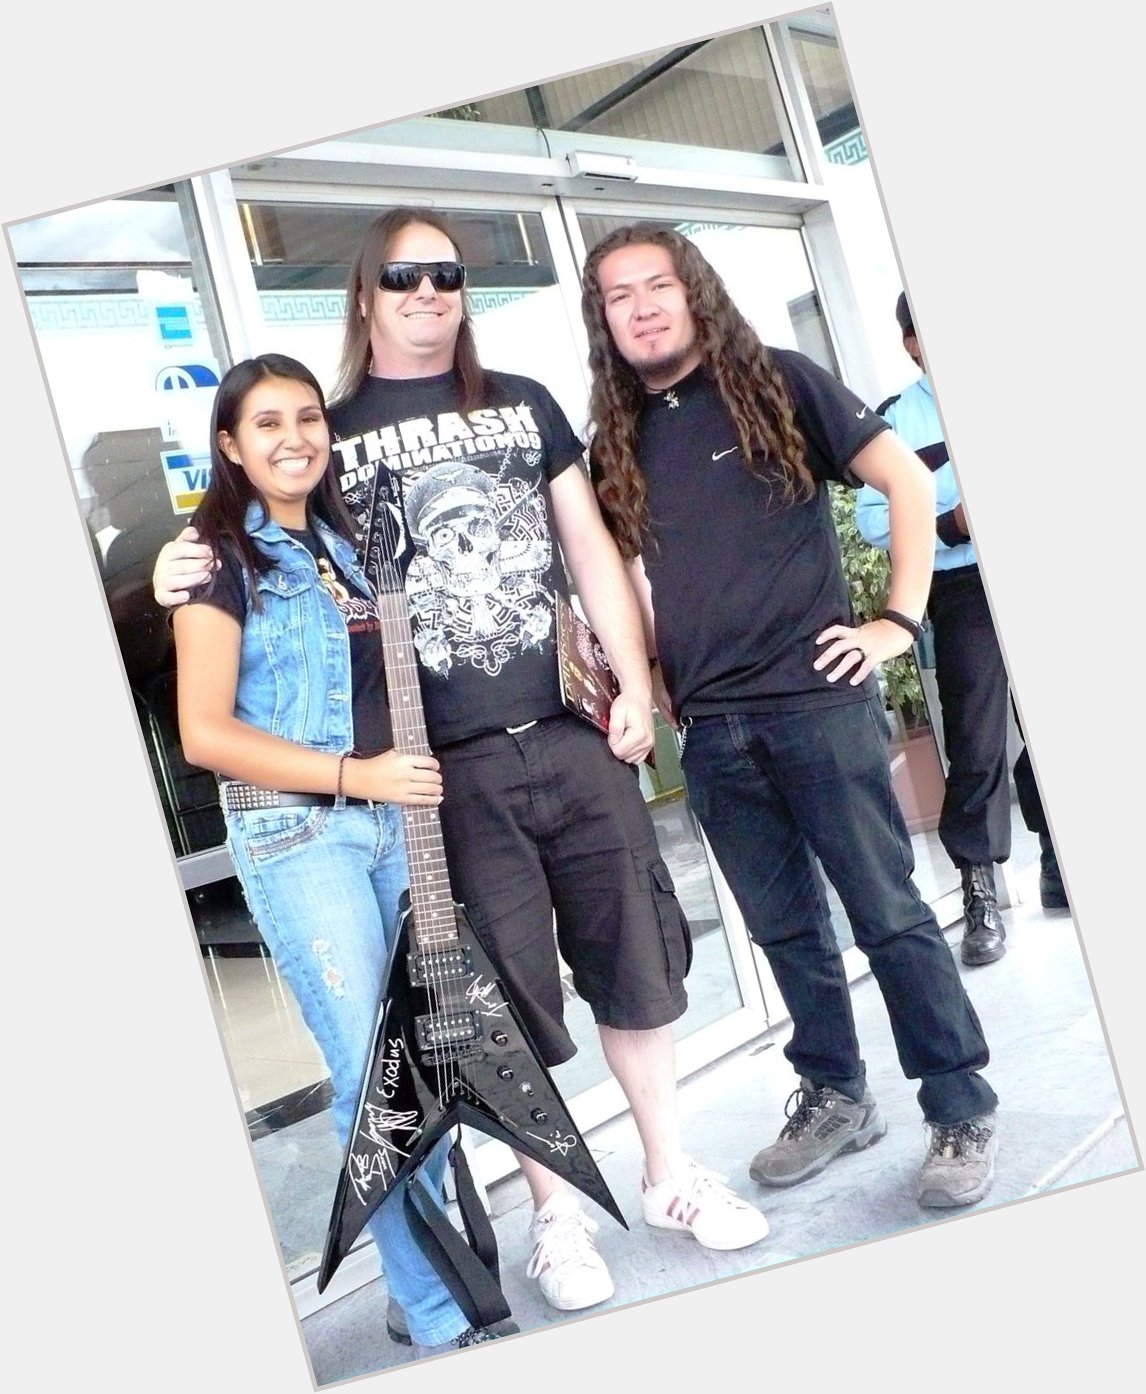 HAPPY BIRTHDAY GARY HOLT, AND GUITAR.
SOME YEARS AGO IN QUITO, ECUADOR!!! 